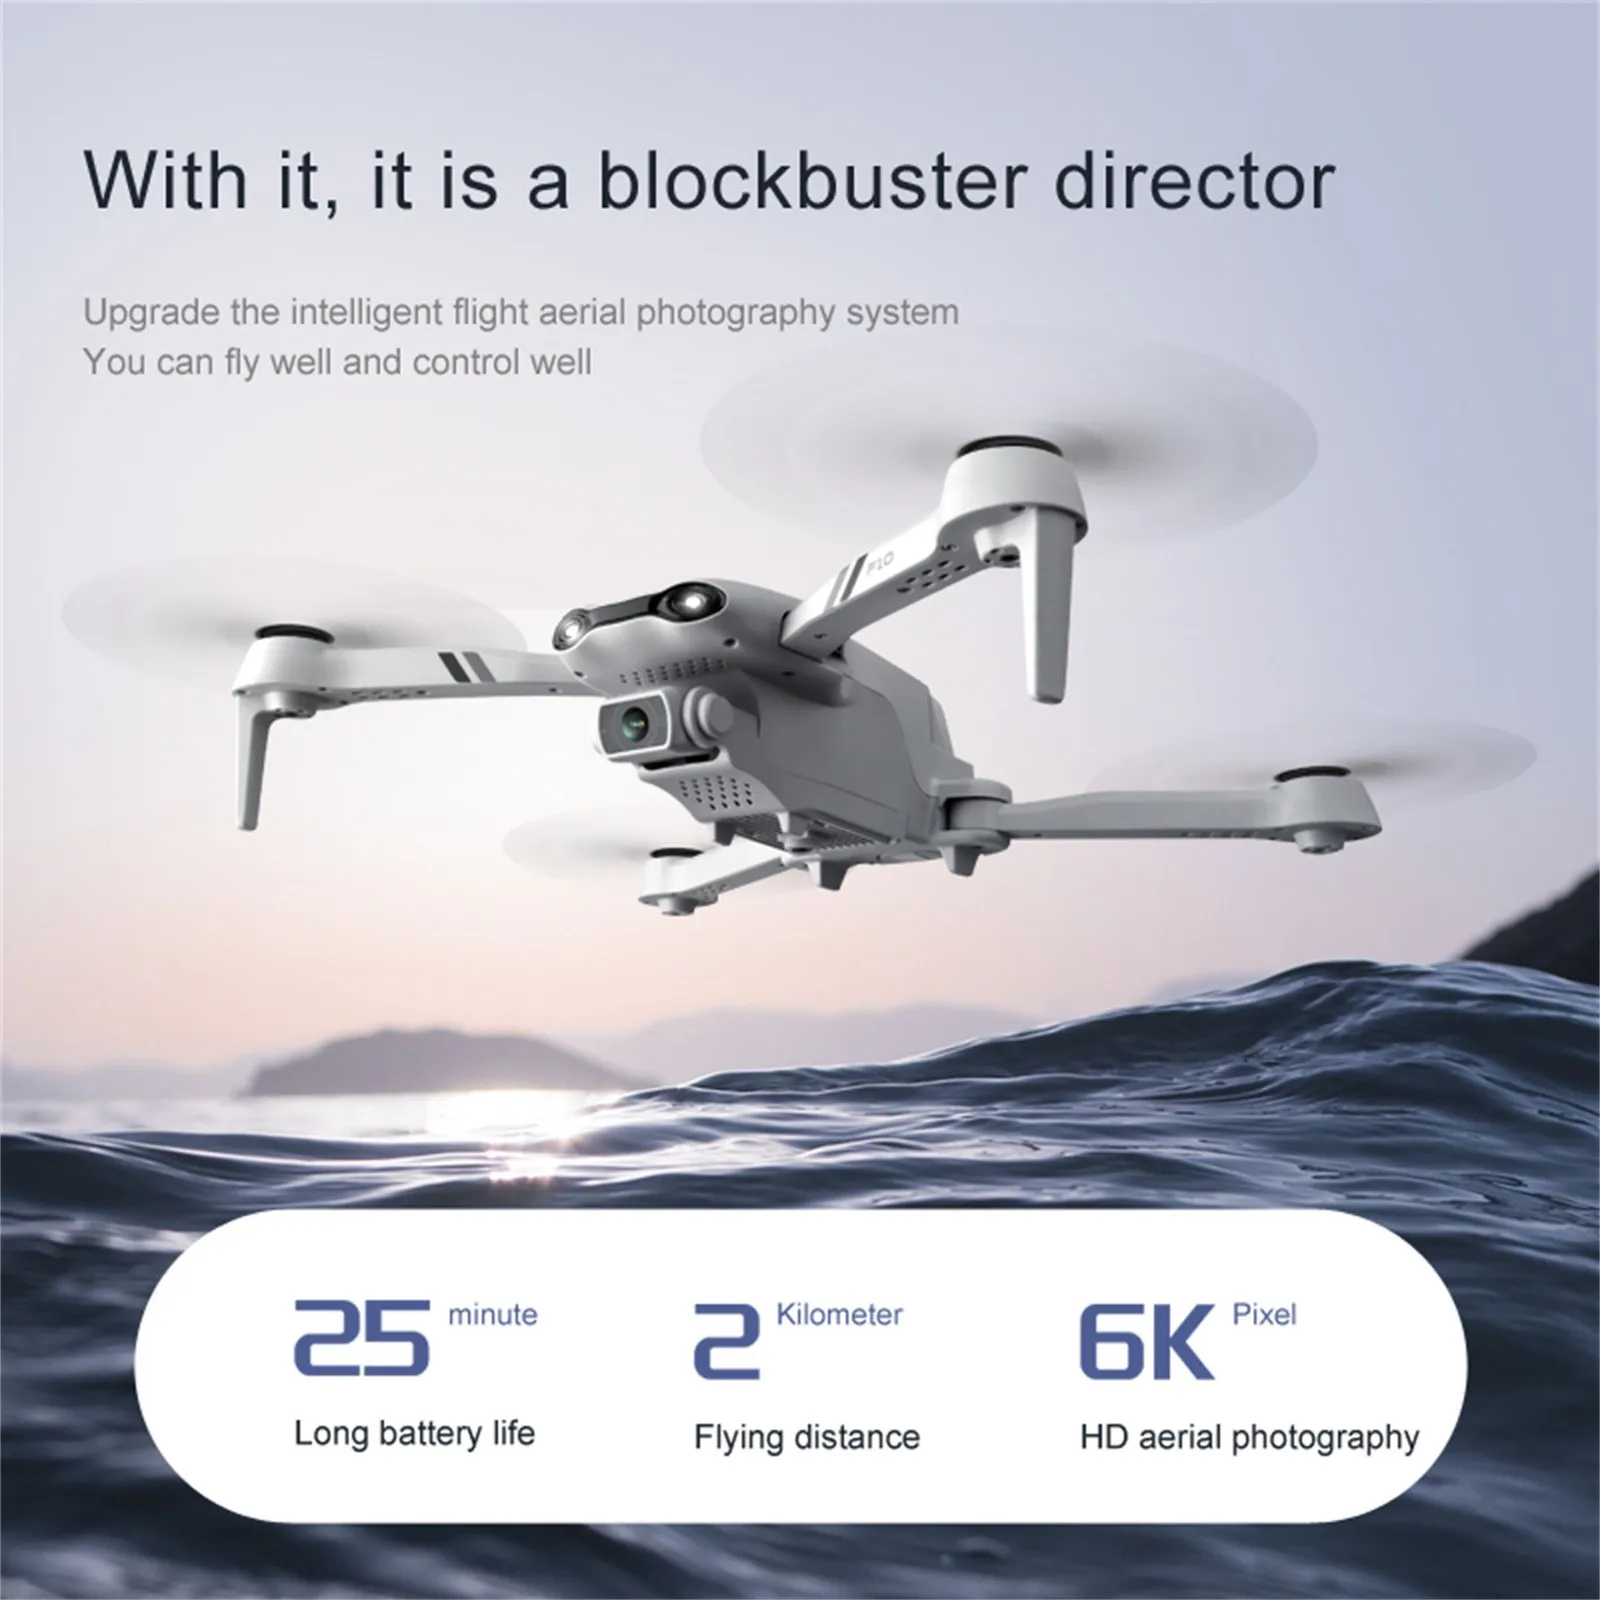 2021 New F10 Drone Gps 4g/5g Wifi Live Video Fpv Quadcopter 25min 2km Long Distance Foldable Photography Drone With 4k Hd Camera underwater drone camera